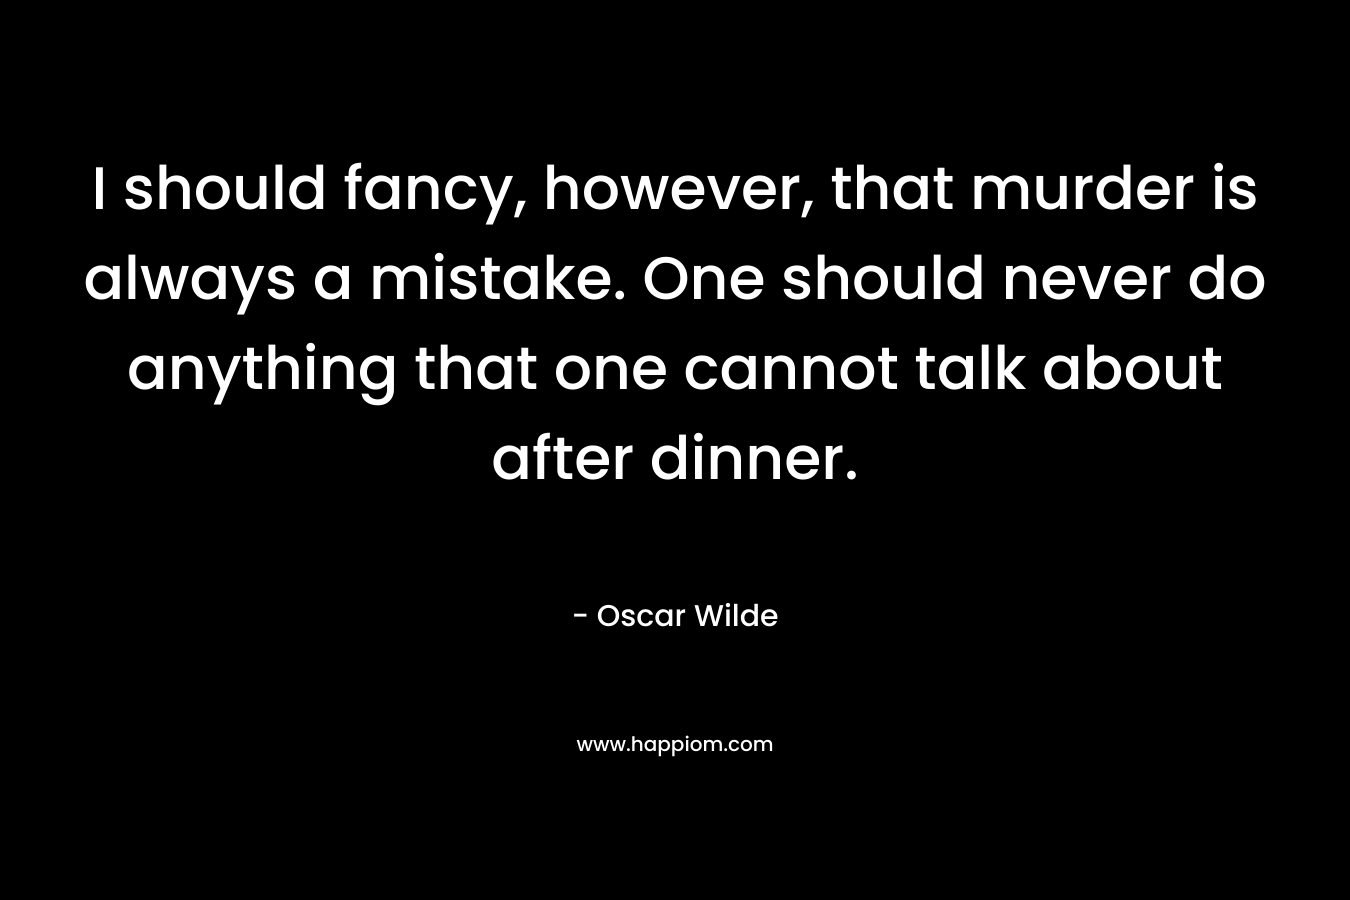 I should fancy, however, that murder is always a mistake. One should never do anything that one cannot talk about after dinner.